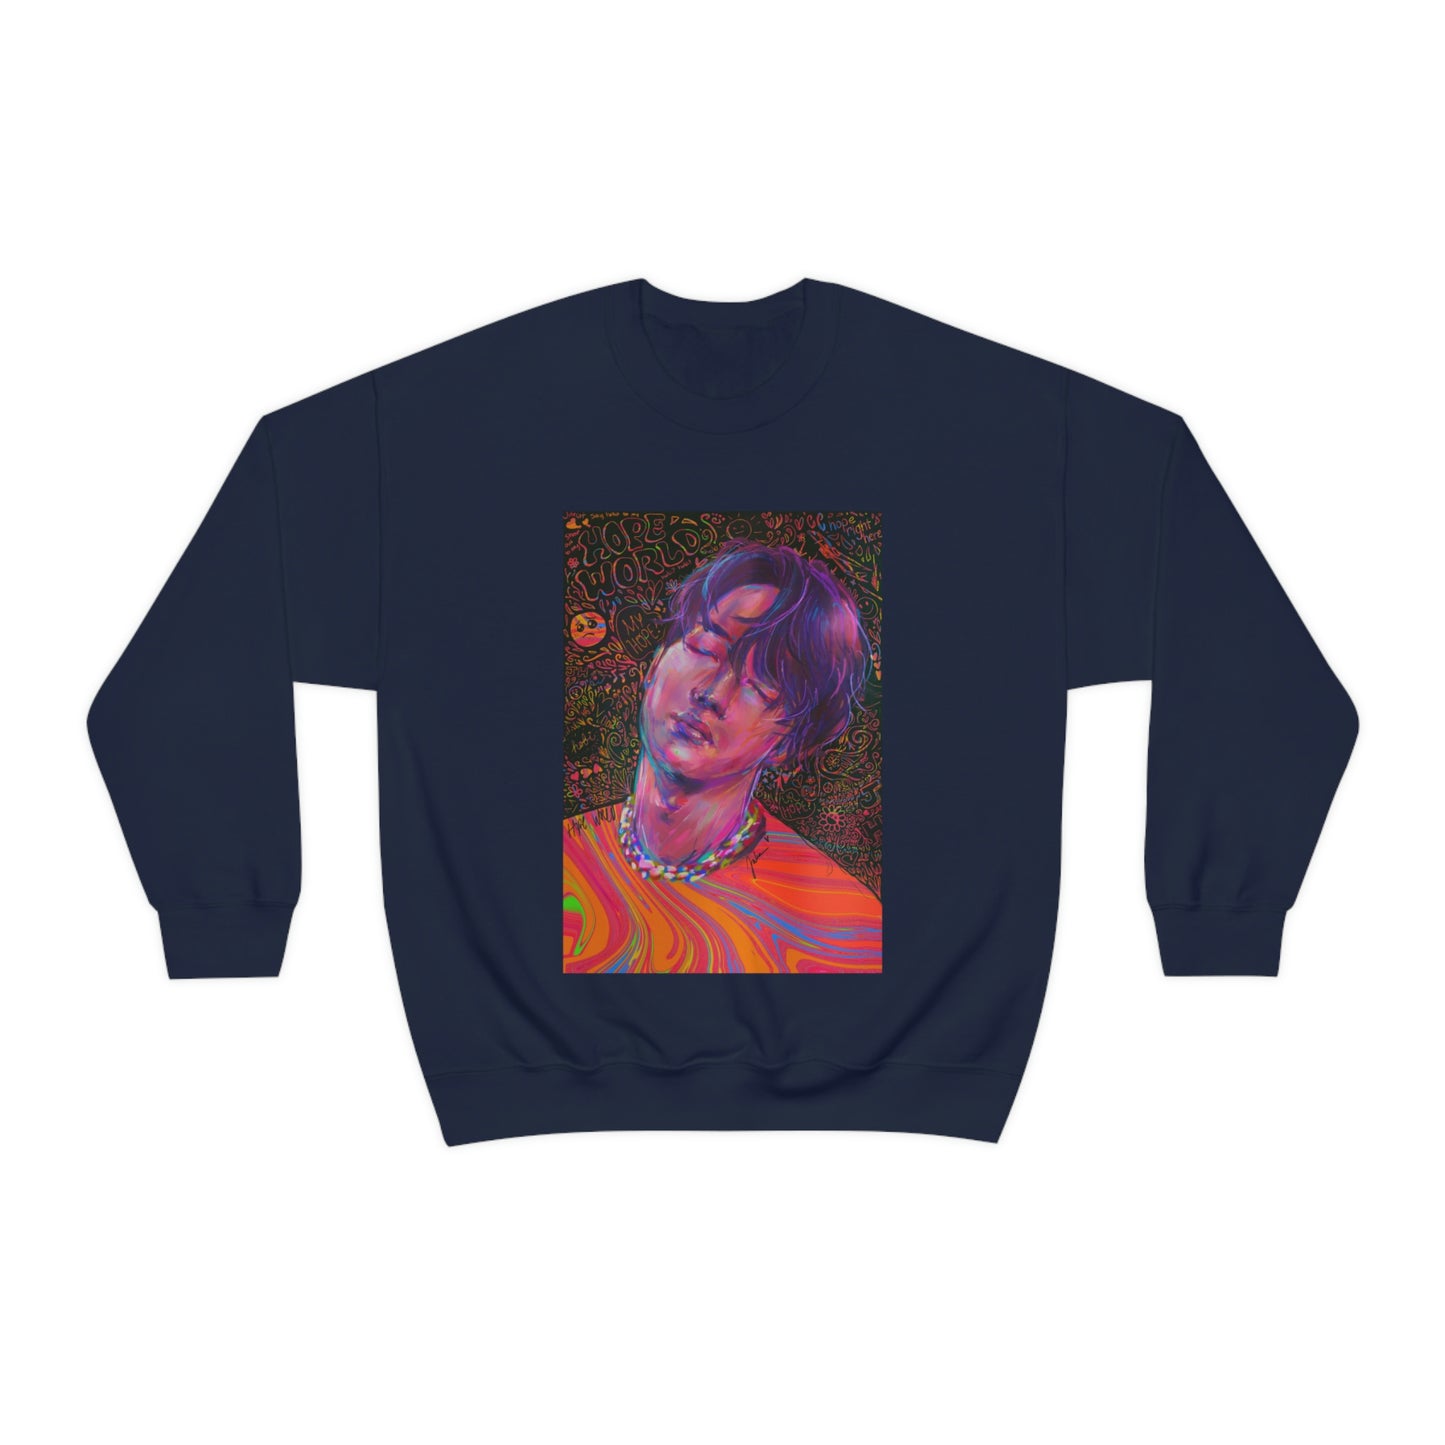 Colors of Hope Sweatshirt *Limited Edition*